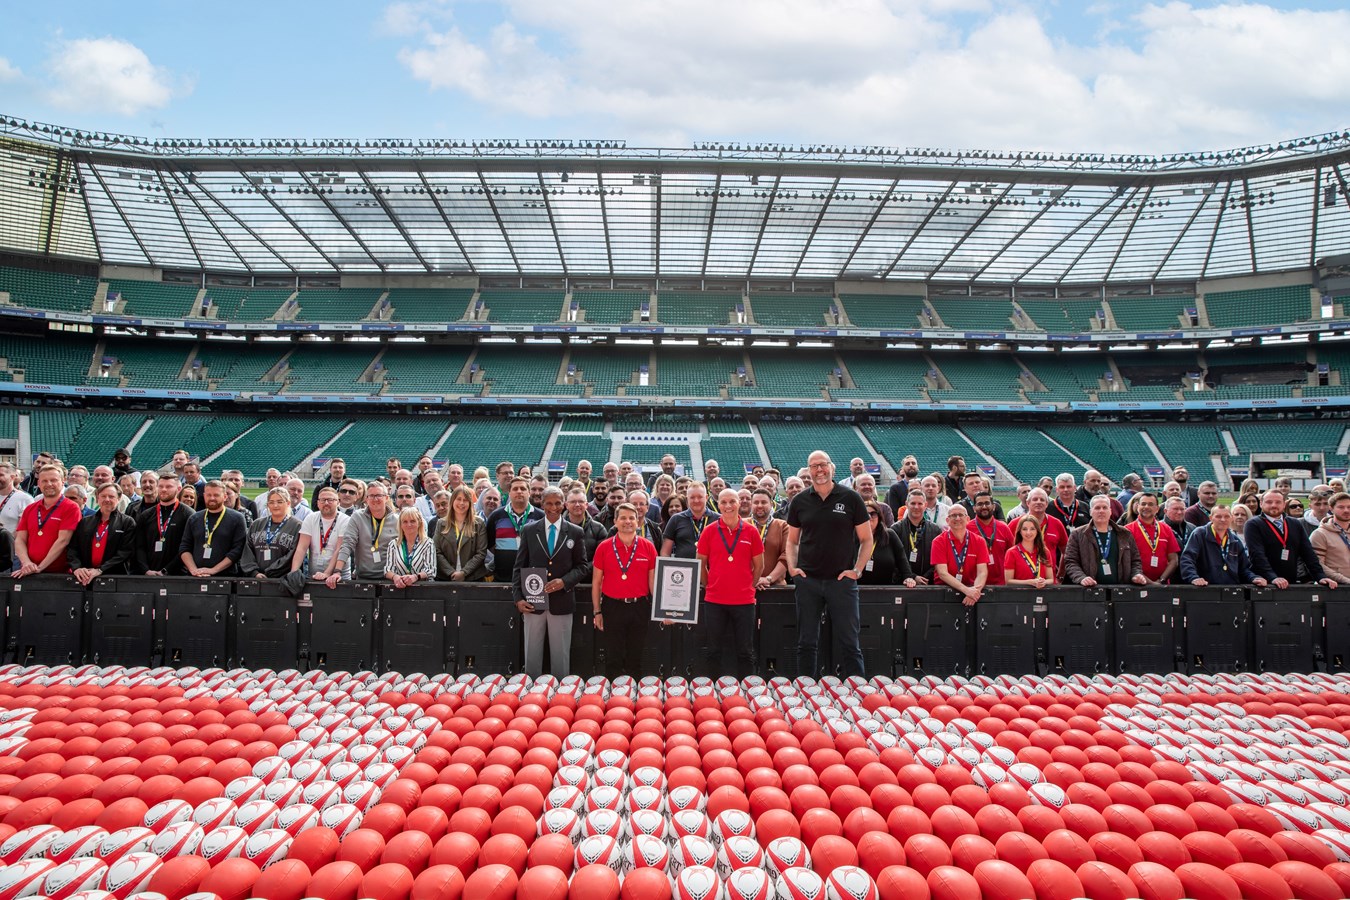 /images/news/2022-04-29-honda-uk-sets-guiness-record-for-largest-rugby-ball-mosaic-3.jpg